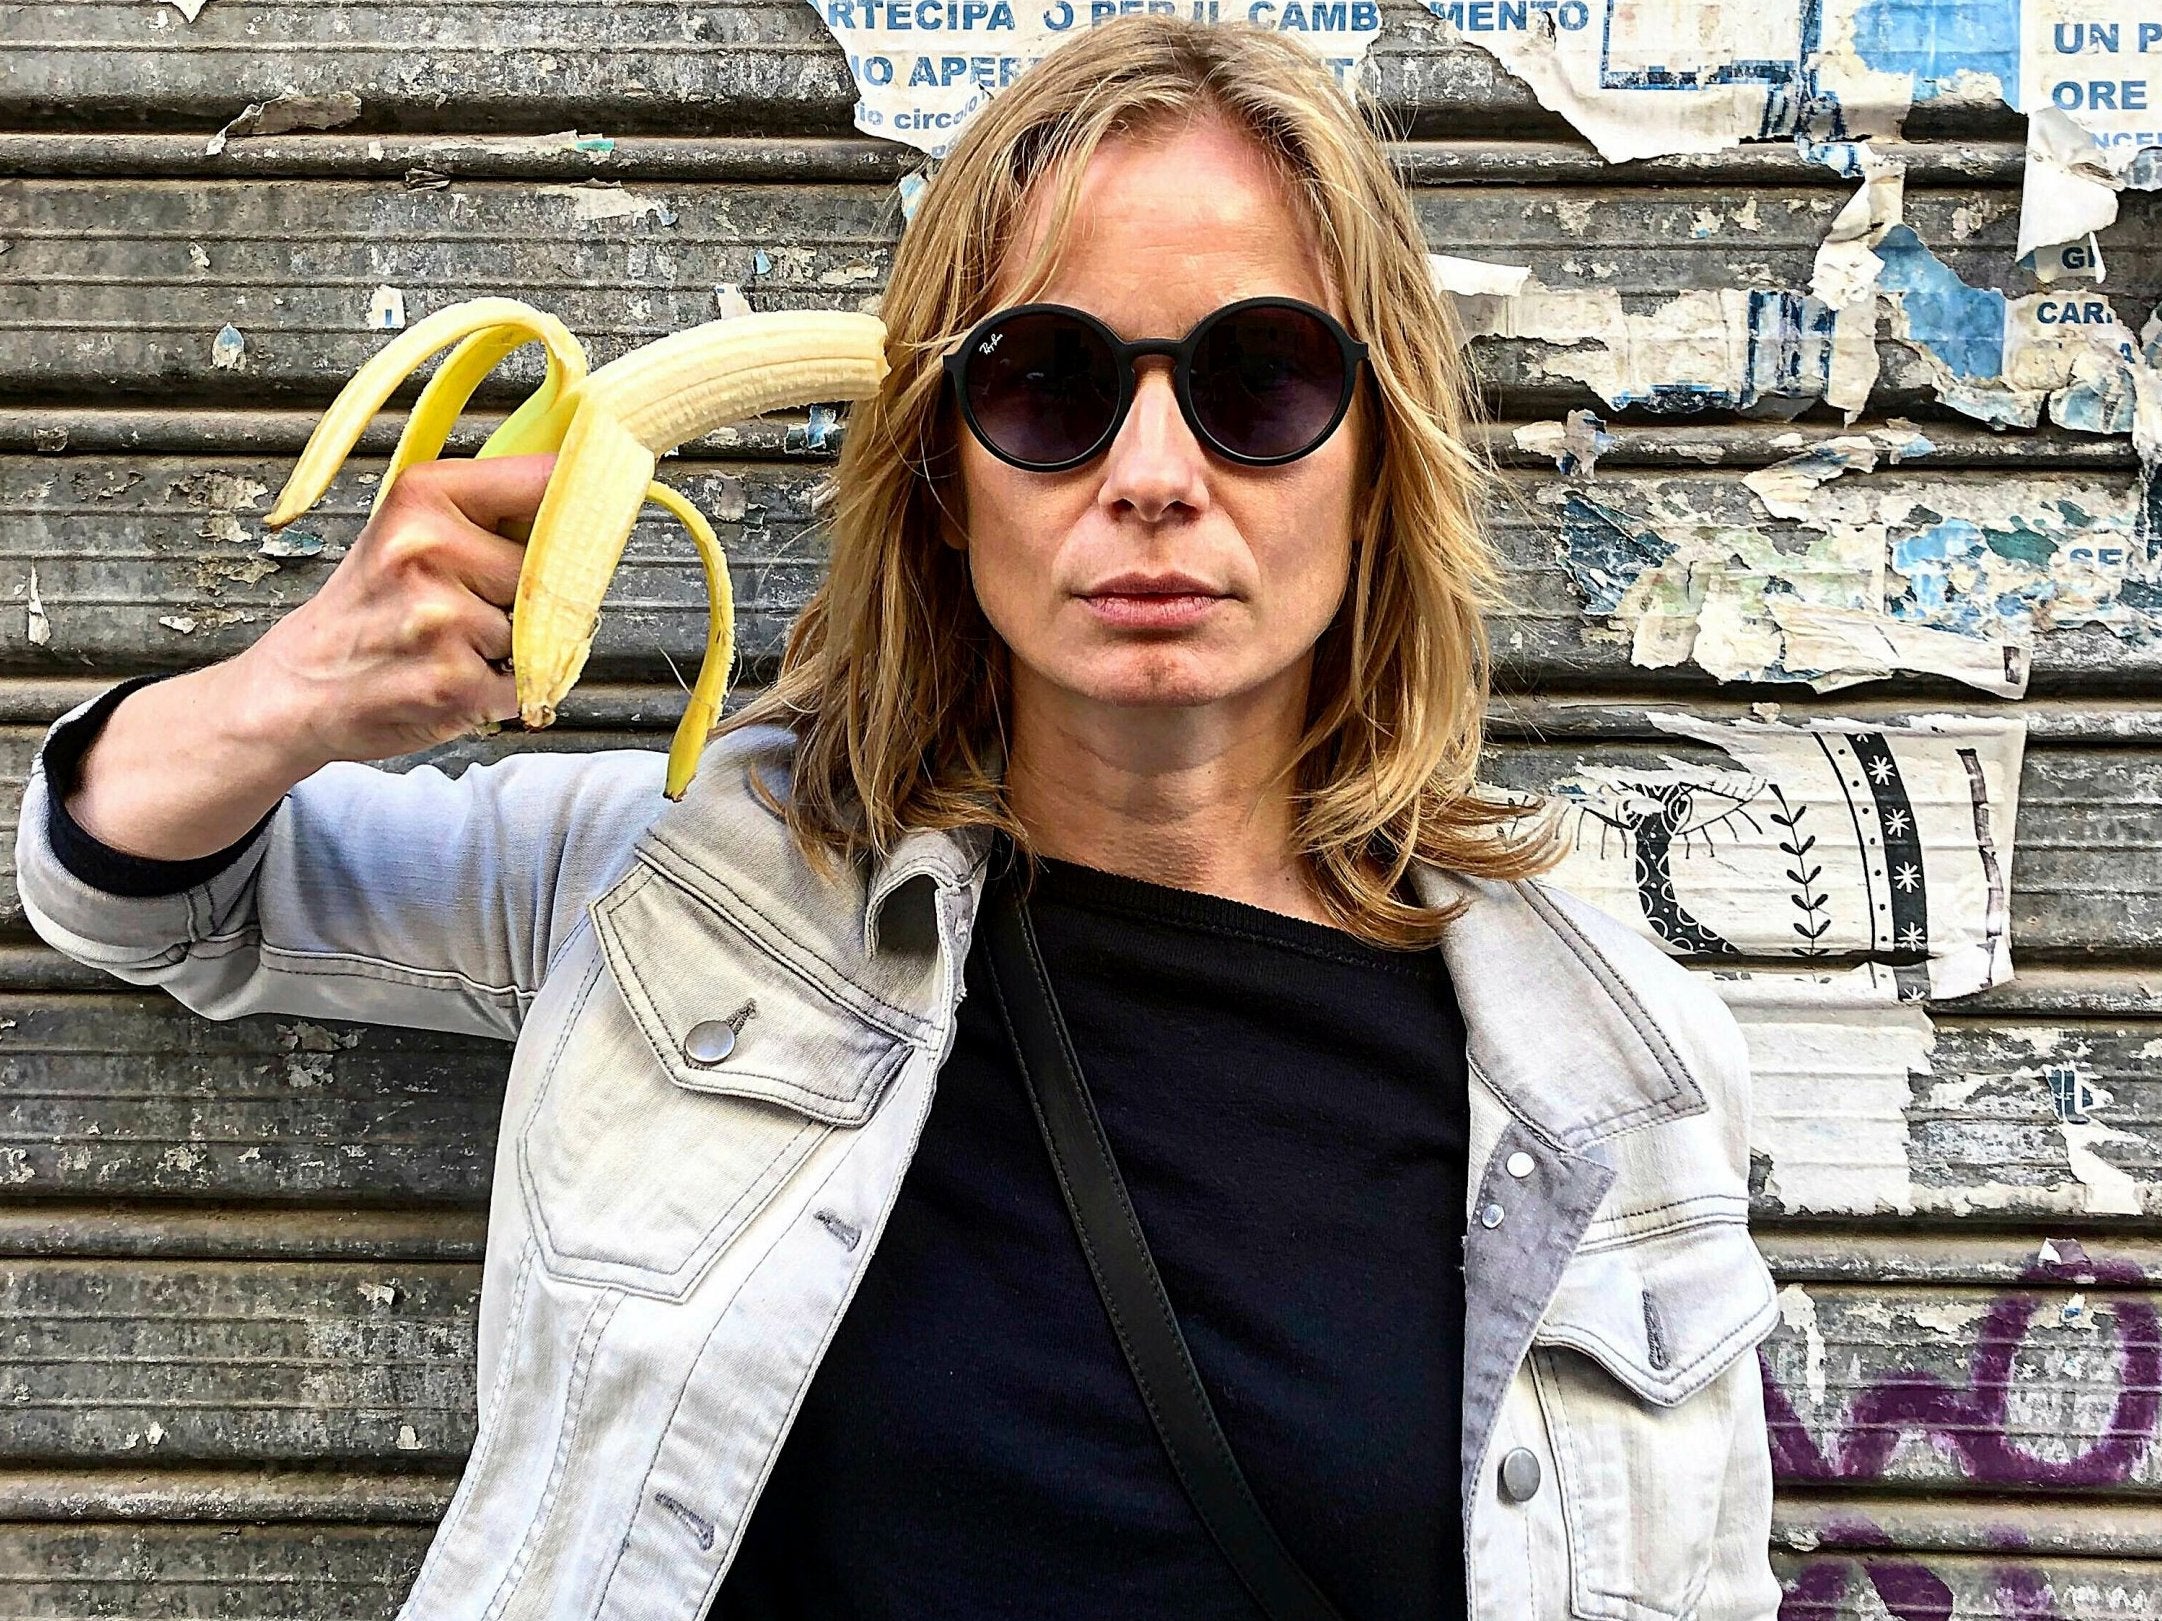 Polish actress Magdalena Cielecka aims a banana like a gun at her head to protest the removal of an artwork from the National Museum in Warsaw